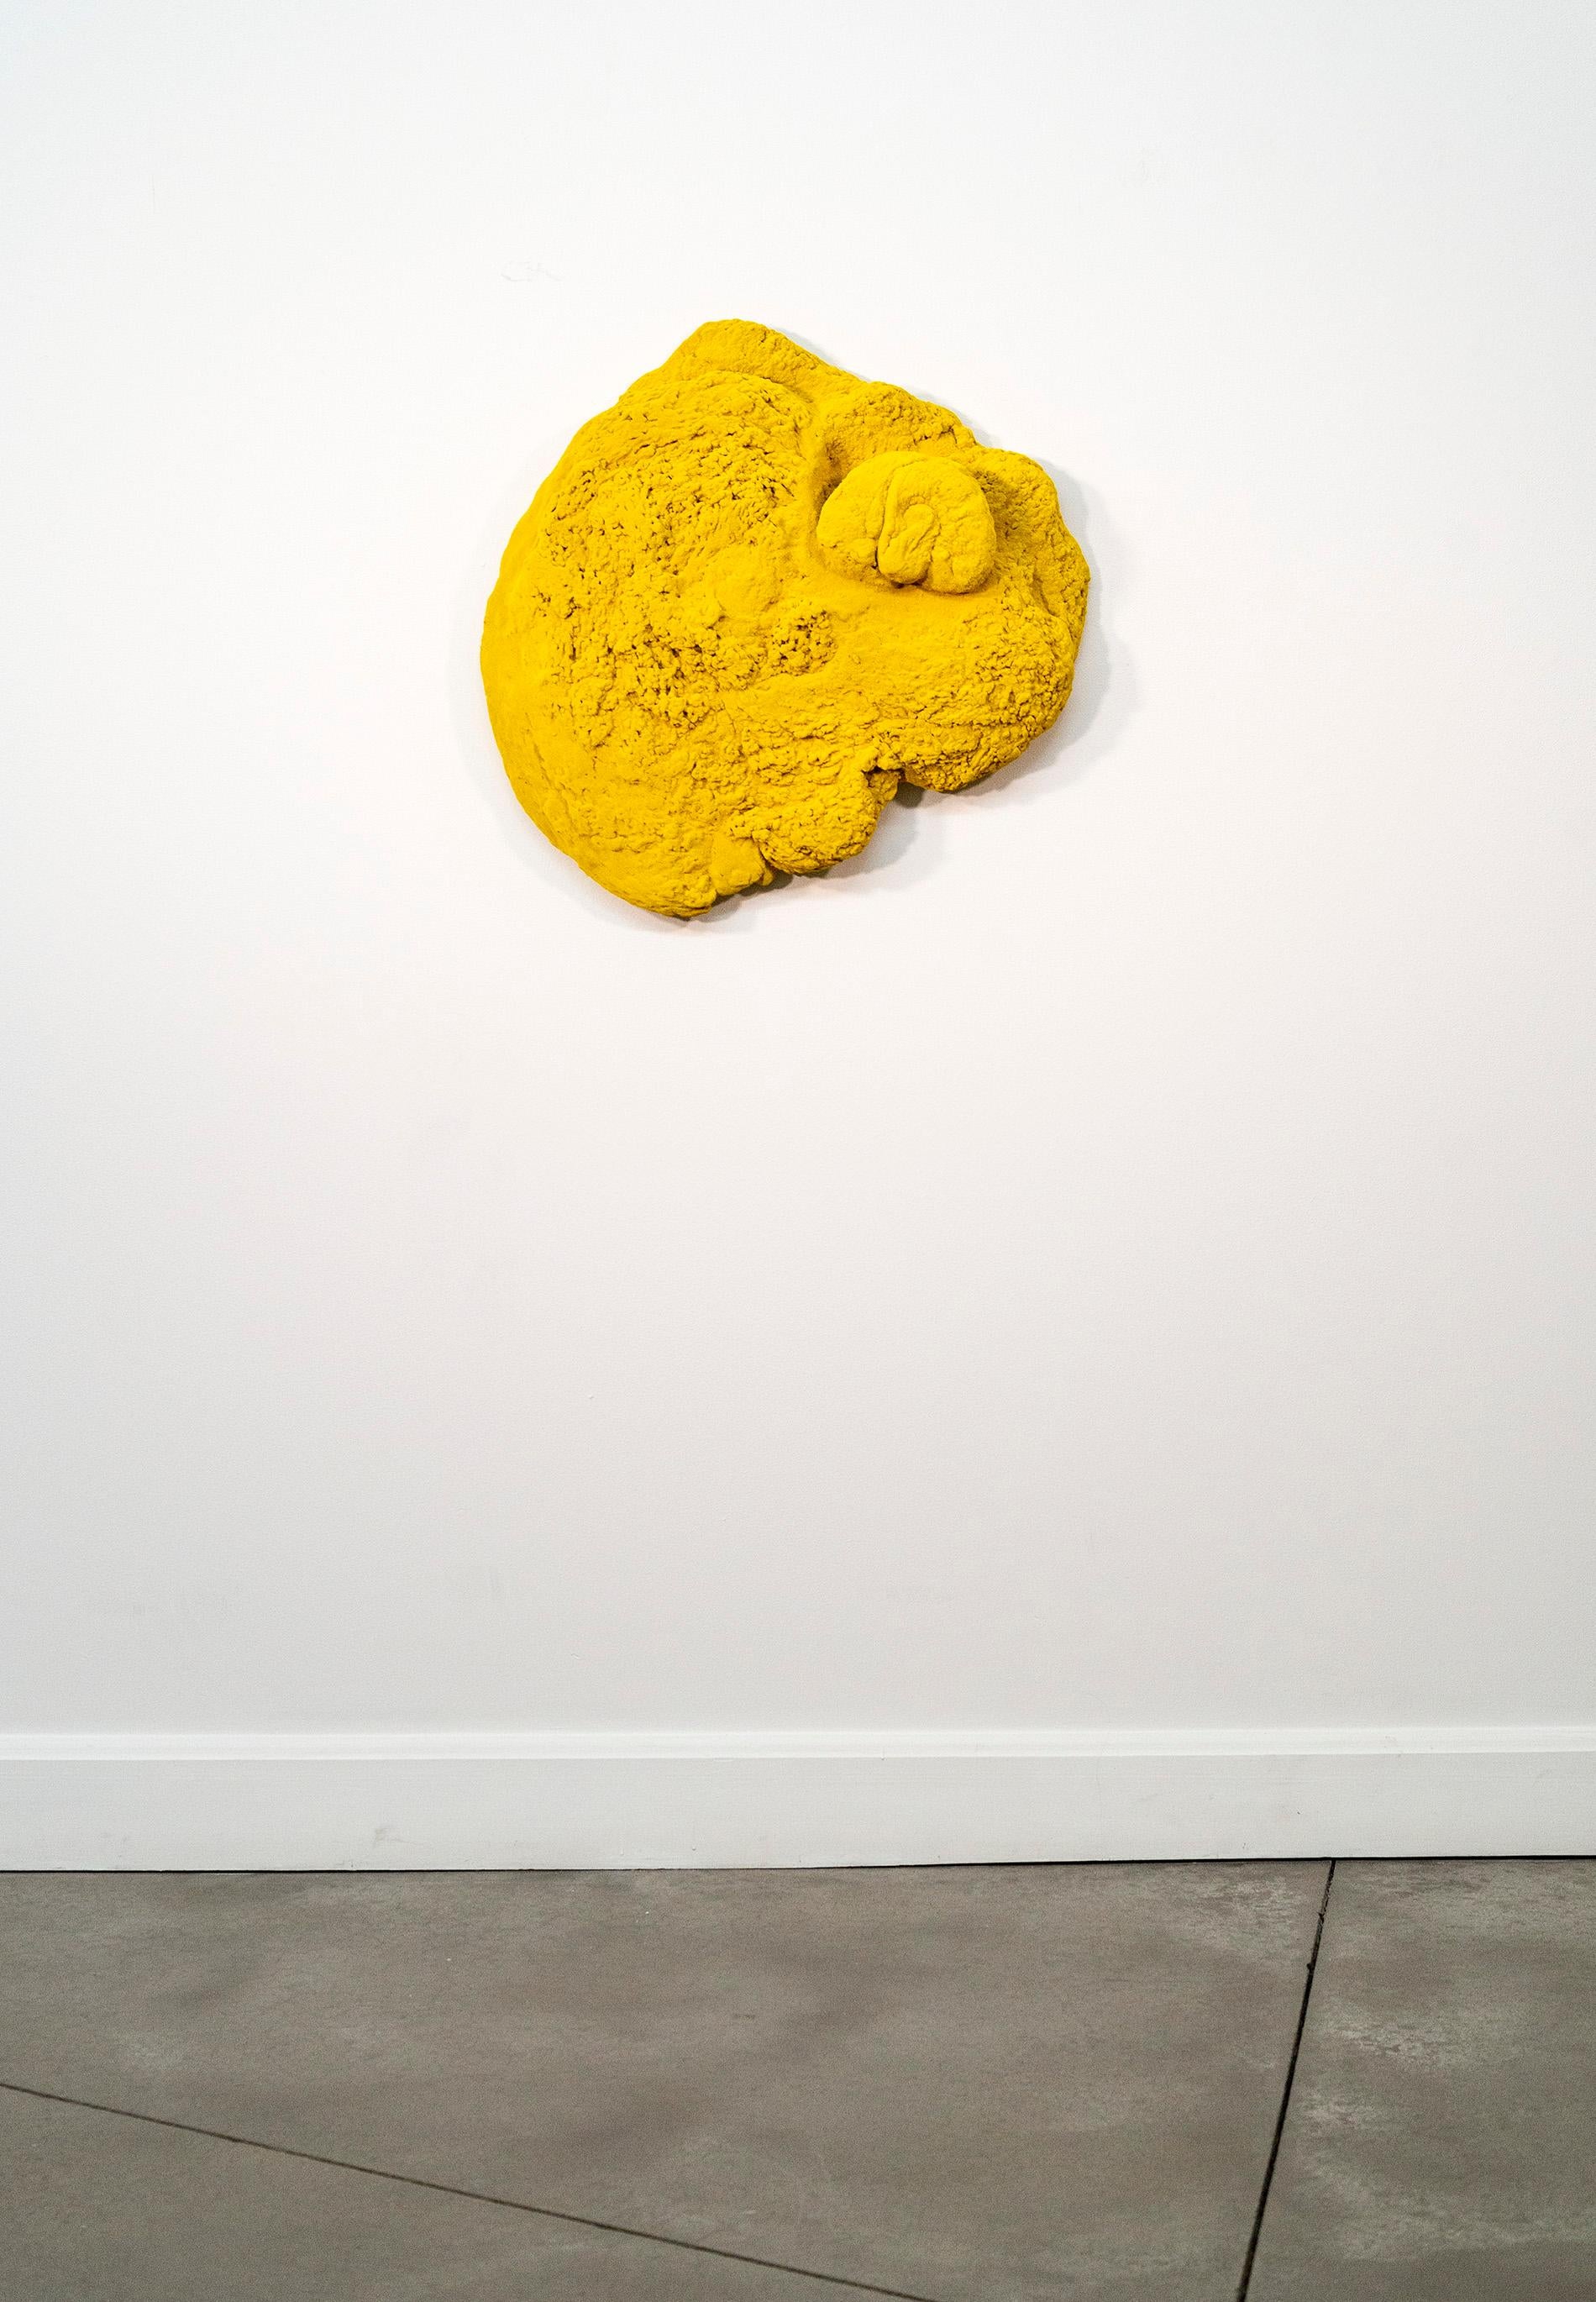 The colour catches your eye at first— a rich, egg yolk yellow. The form is intriguing—organic. This is Shayne Dark. The Kingston based sculptor is known for his enigmatic and compelling abstract sculptures inspired by the natural world. With his